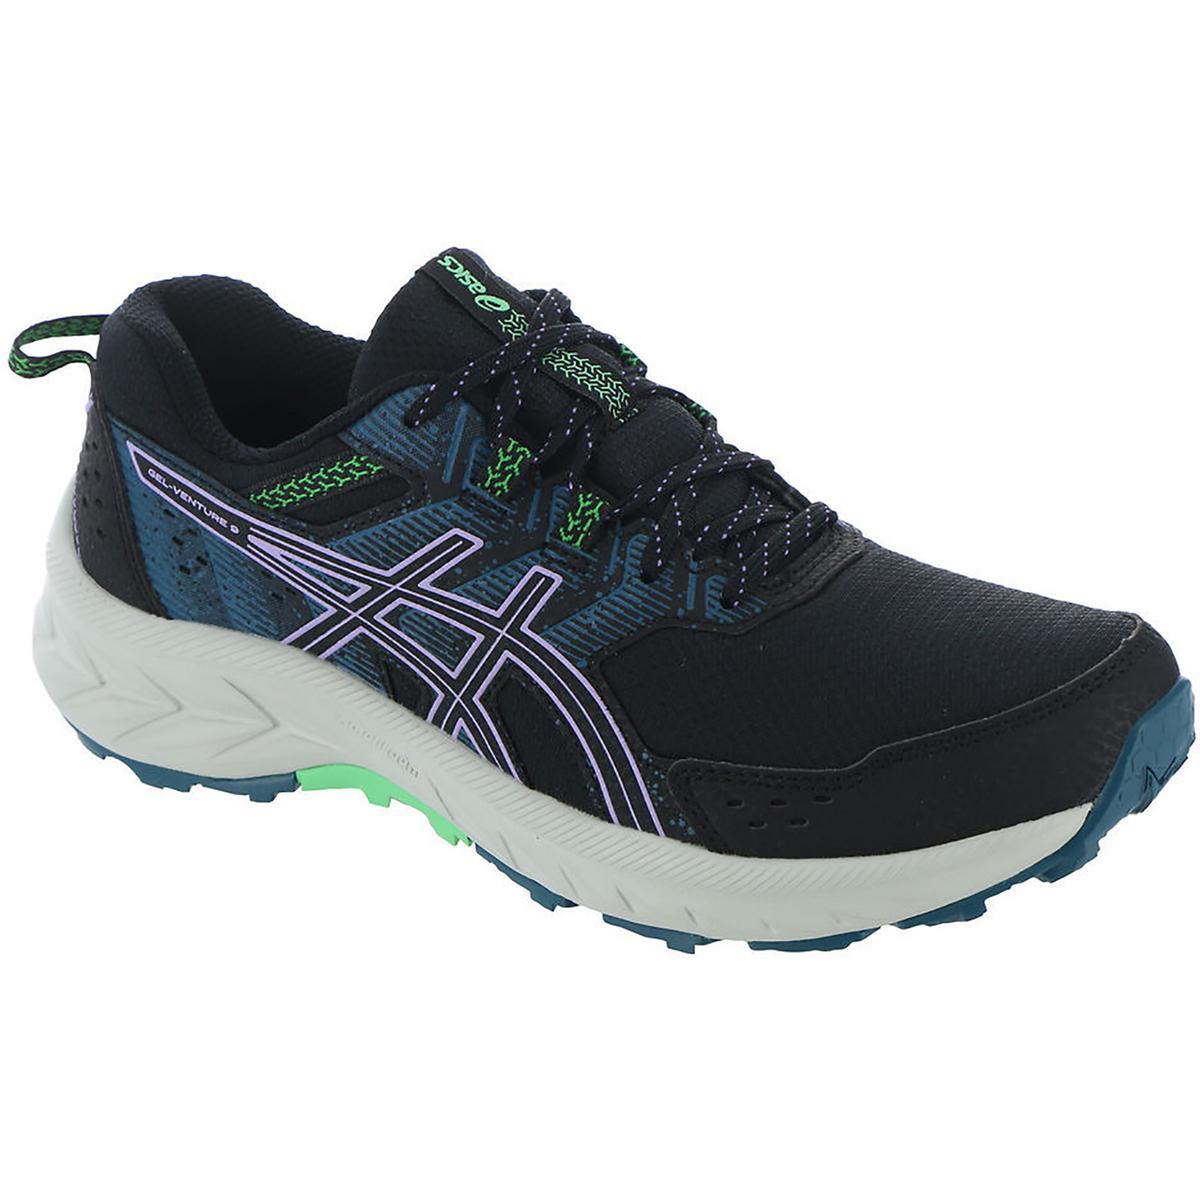 Asics Womens Gel-venture 9 Gym Athletic and Training Shoes Sneakers Bhfo 6559 Black/Digital Violet